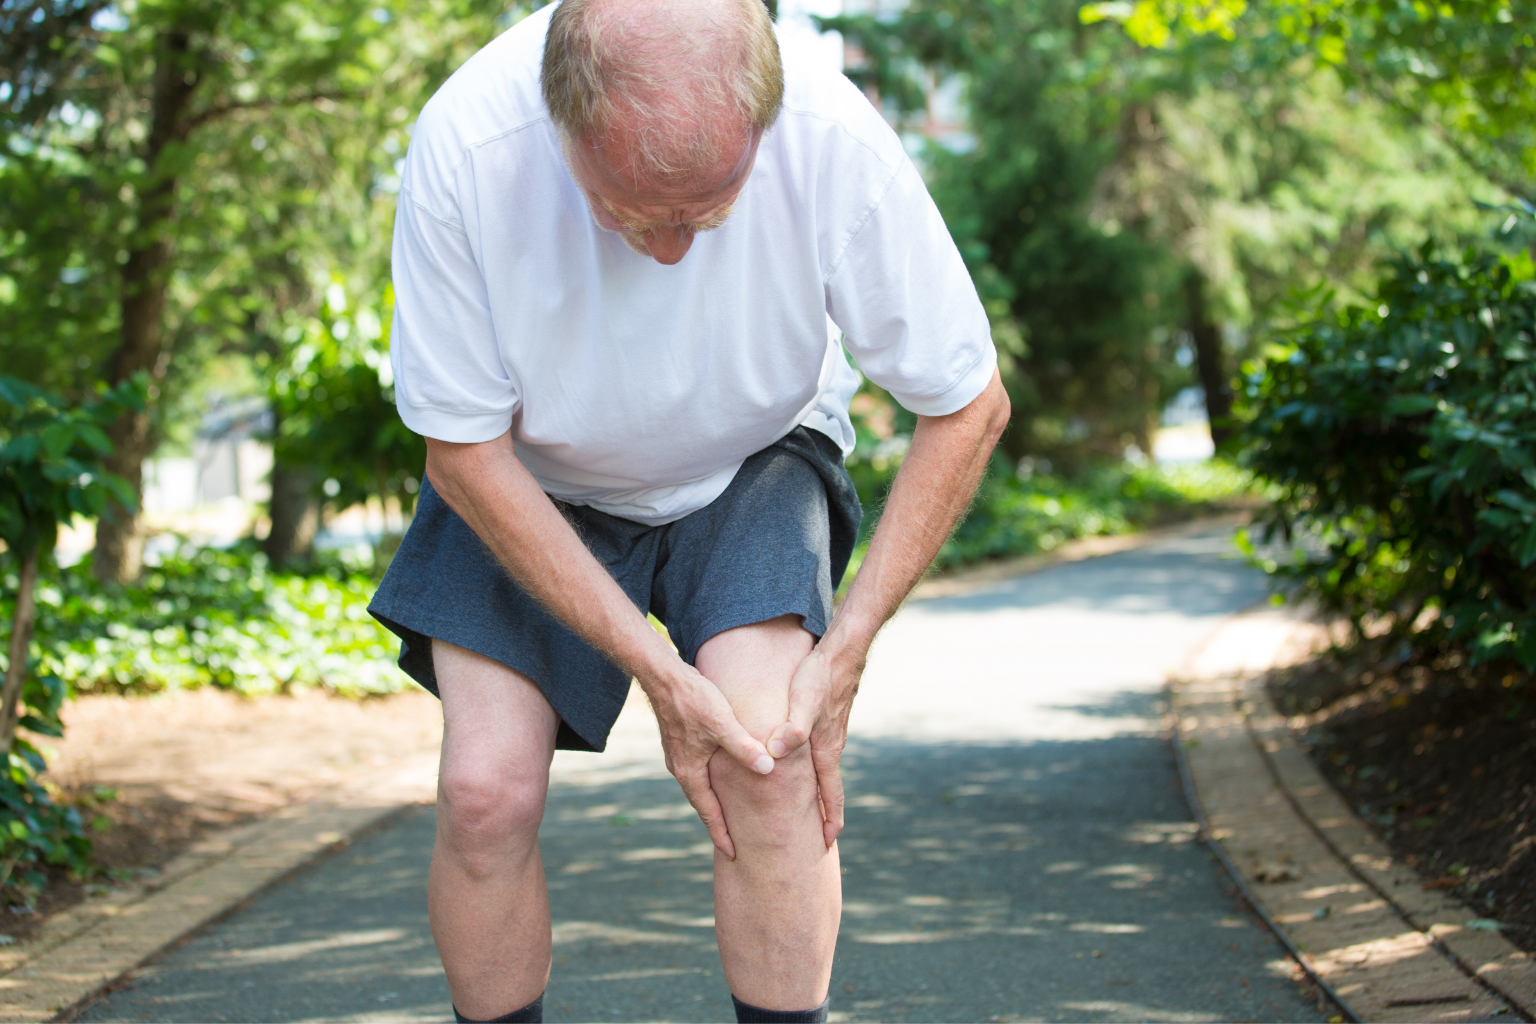 Man clutches his knee while on a run